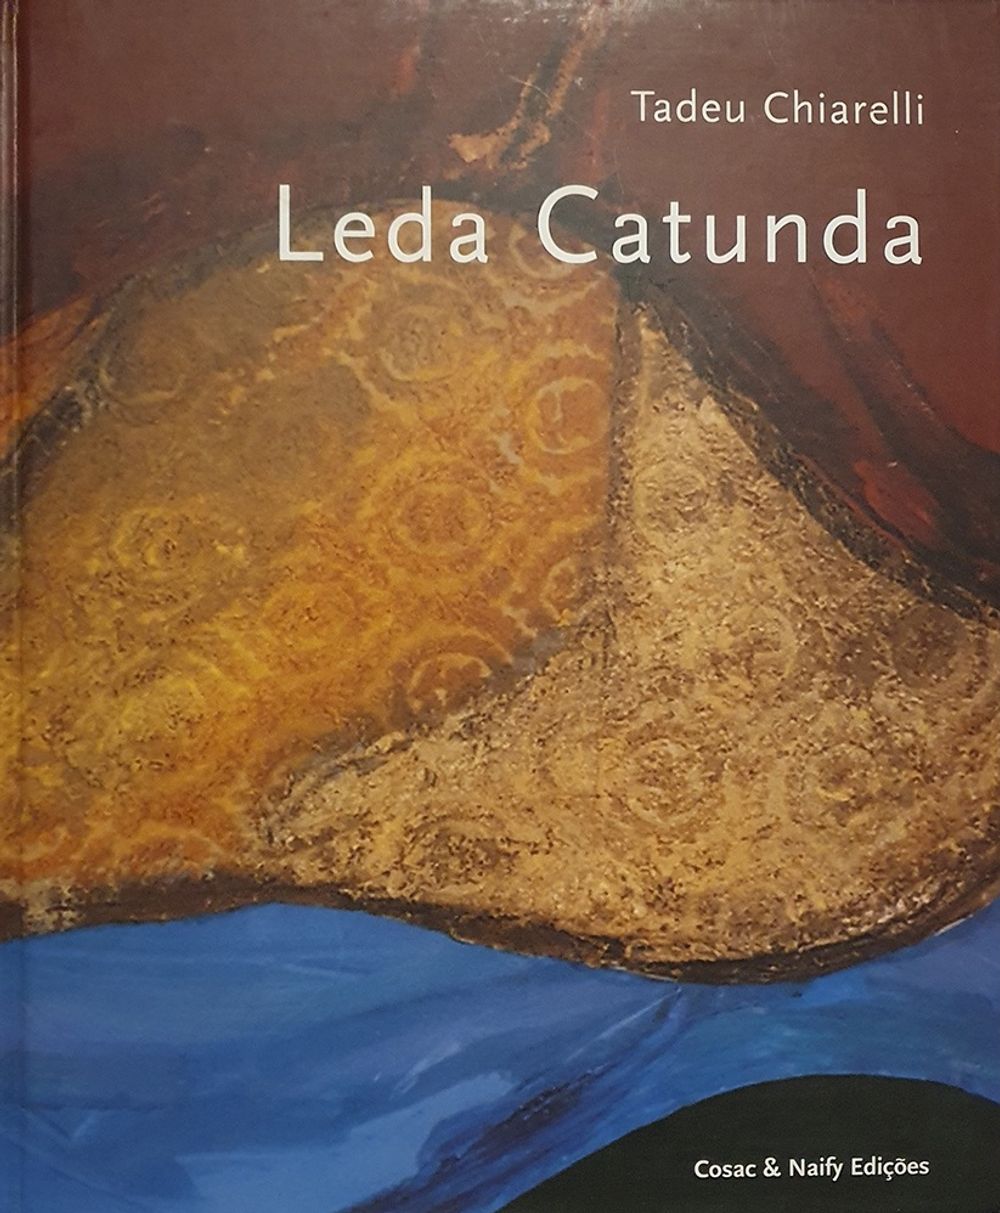 Book cover on plain gray background with title of Leda Catunda